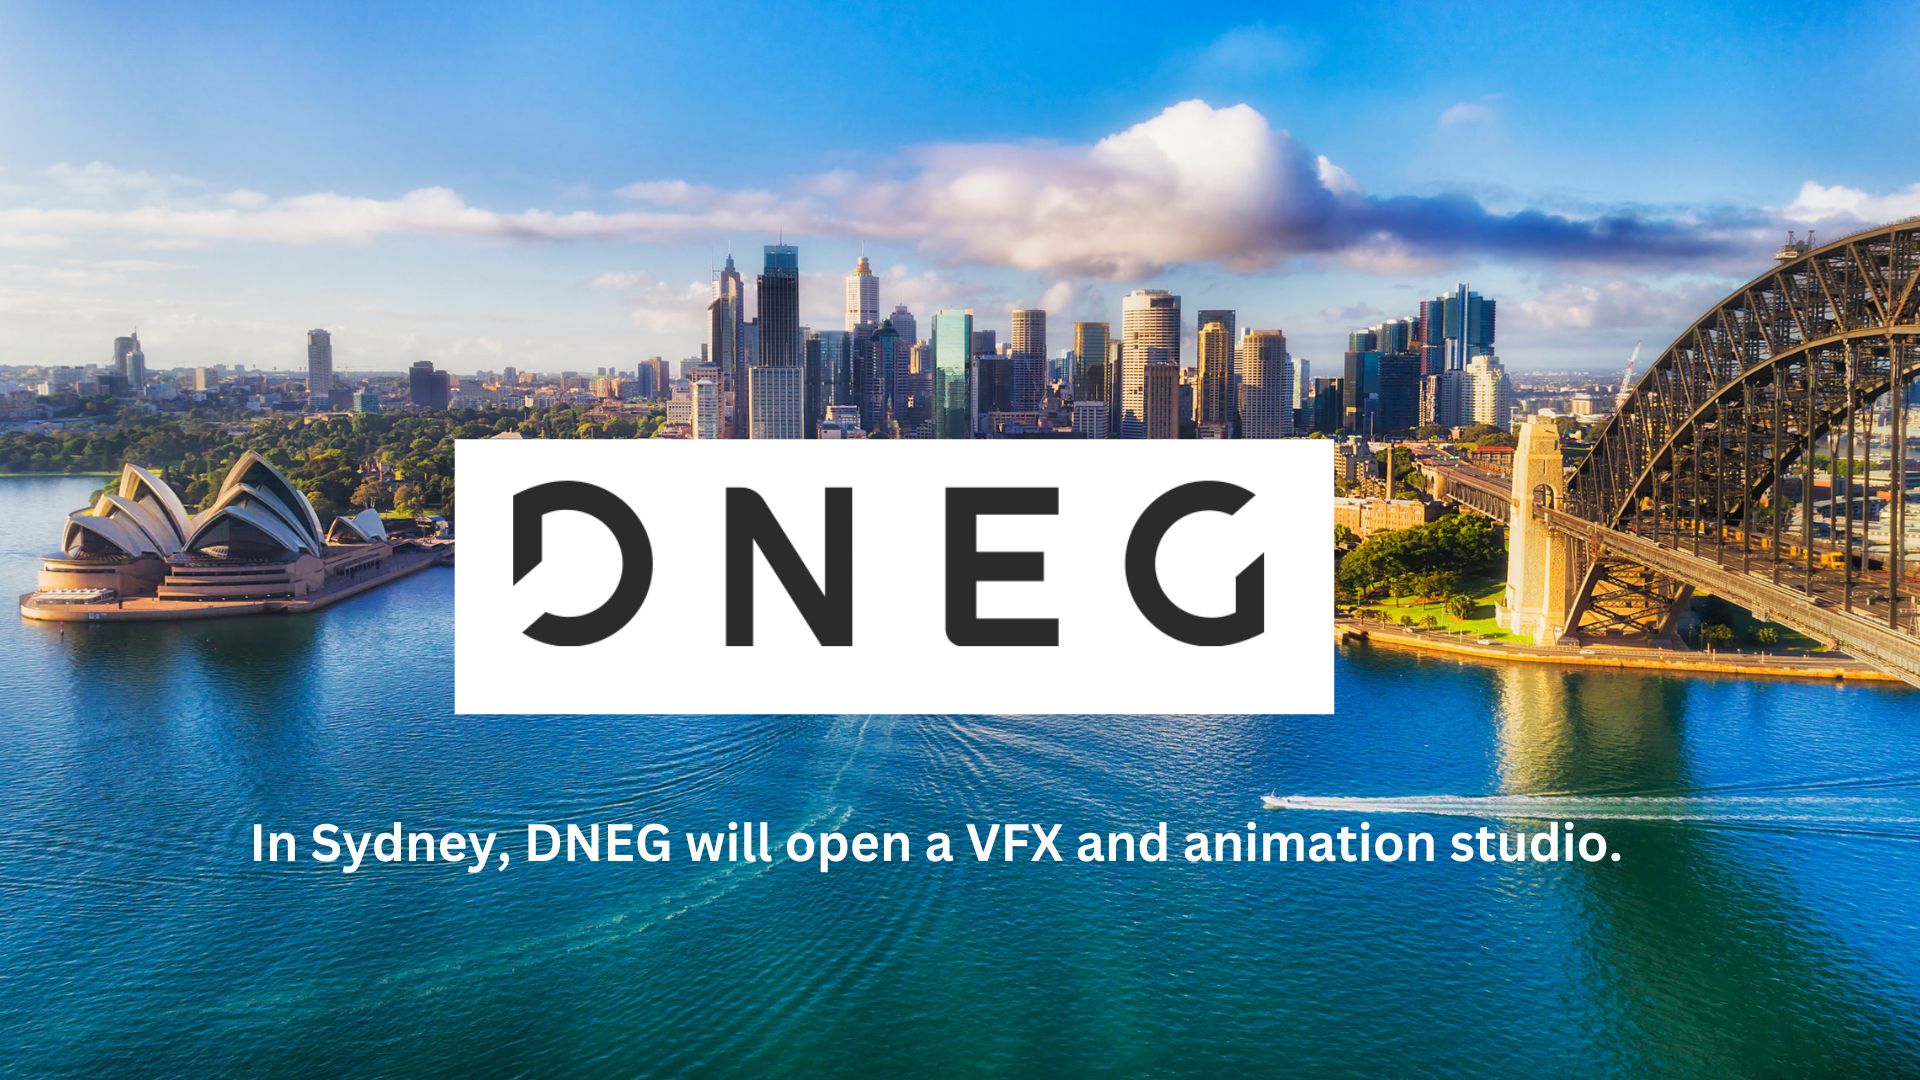 In Sydney, DNEG will open a VFX and animation studio.